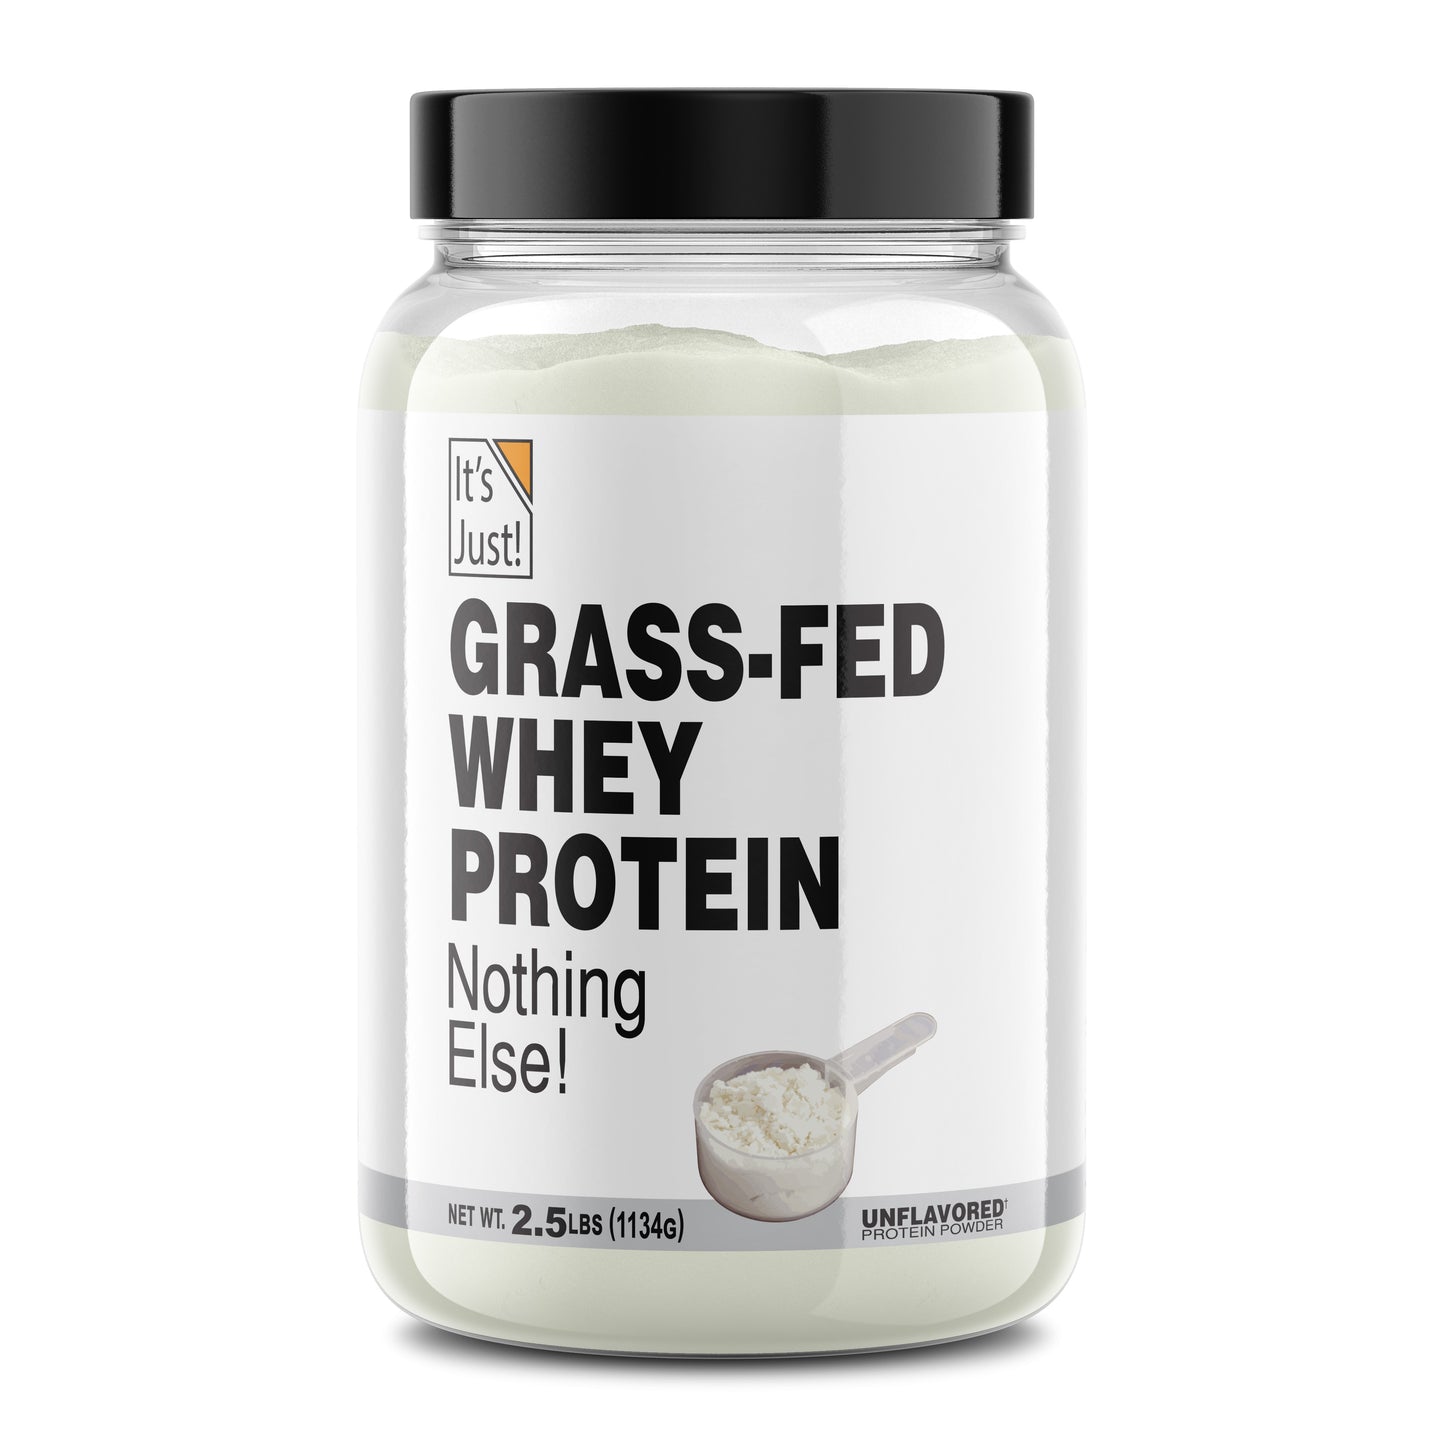 It's Just! - Grass-Fed Whey Protein Concentrate